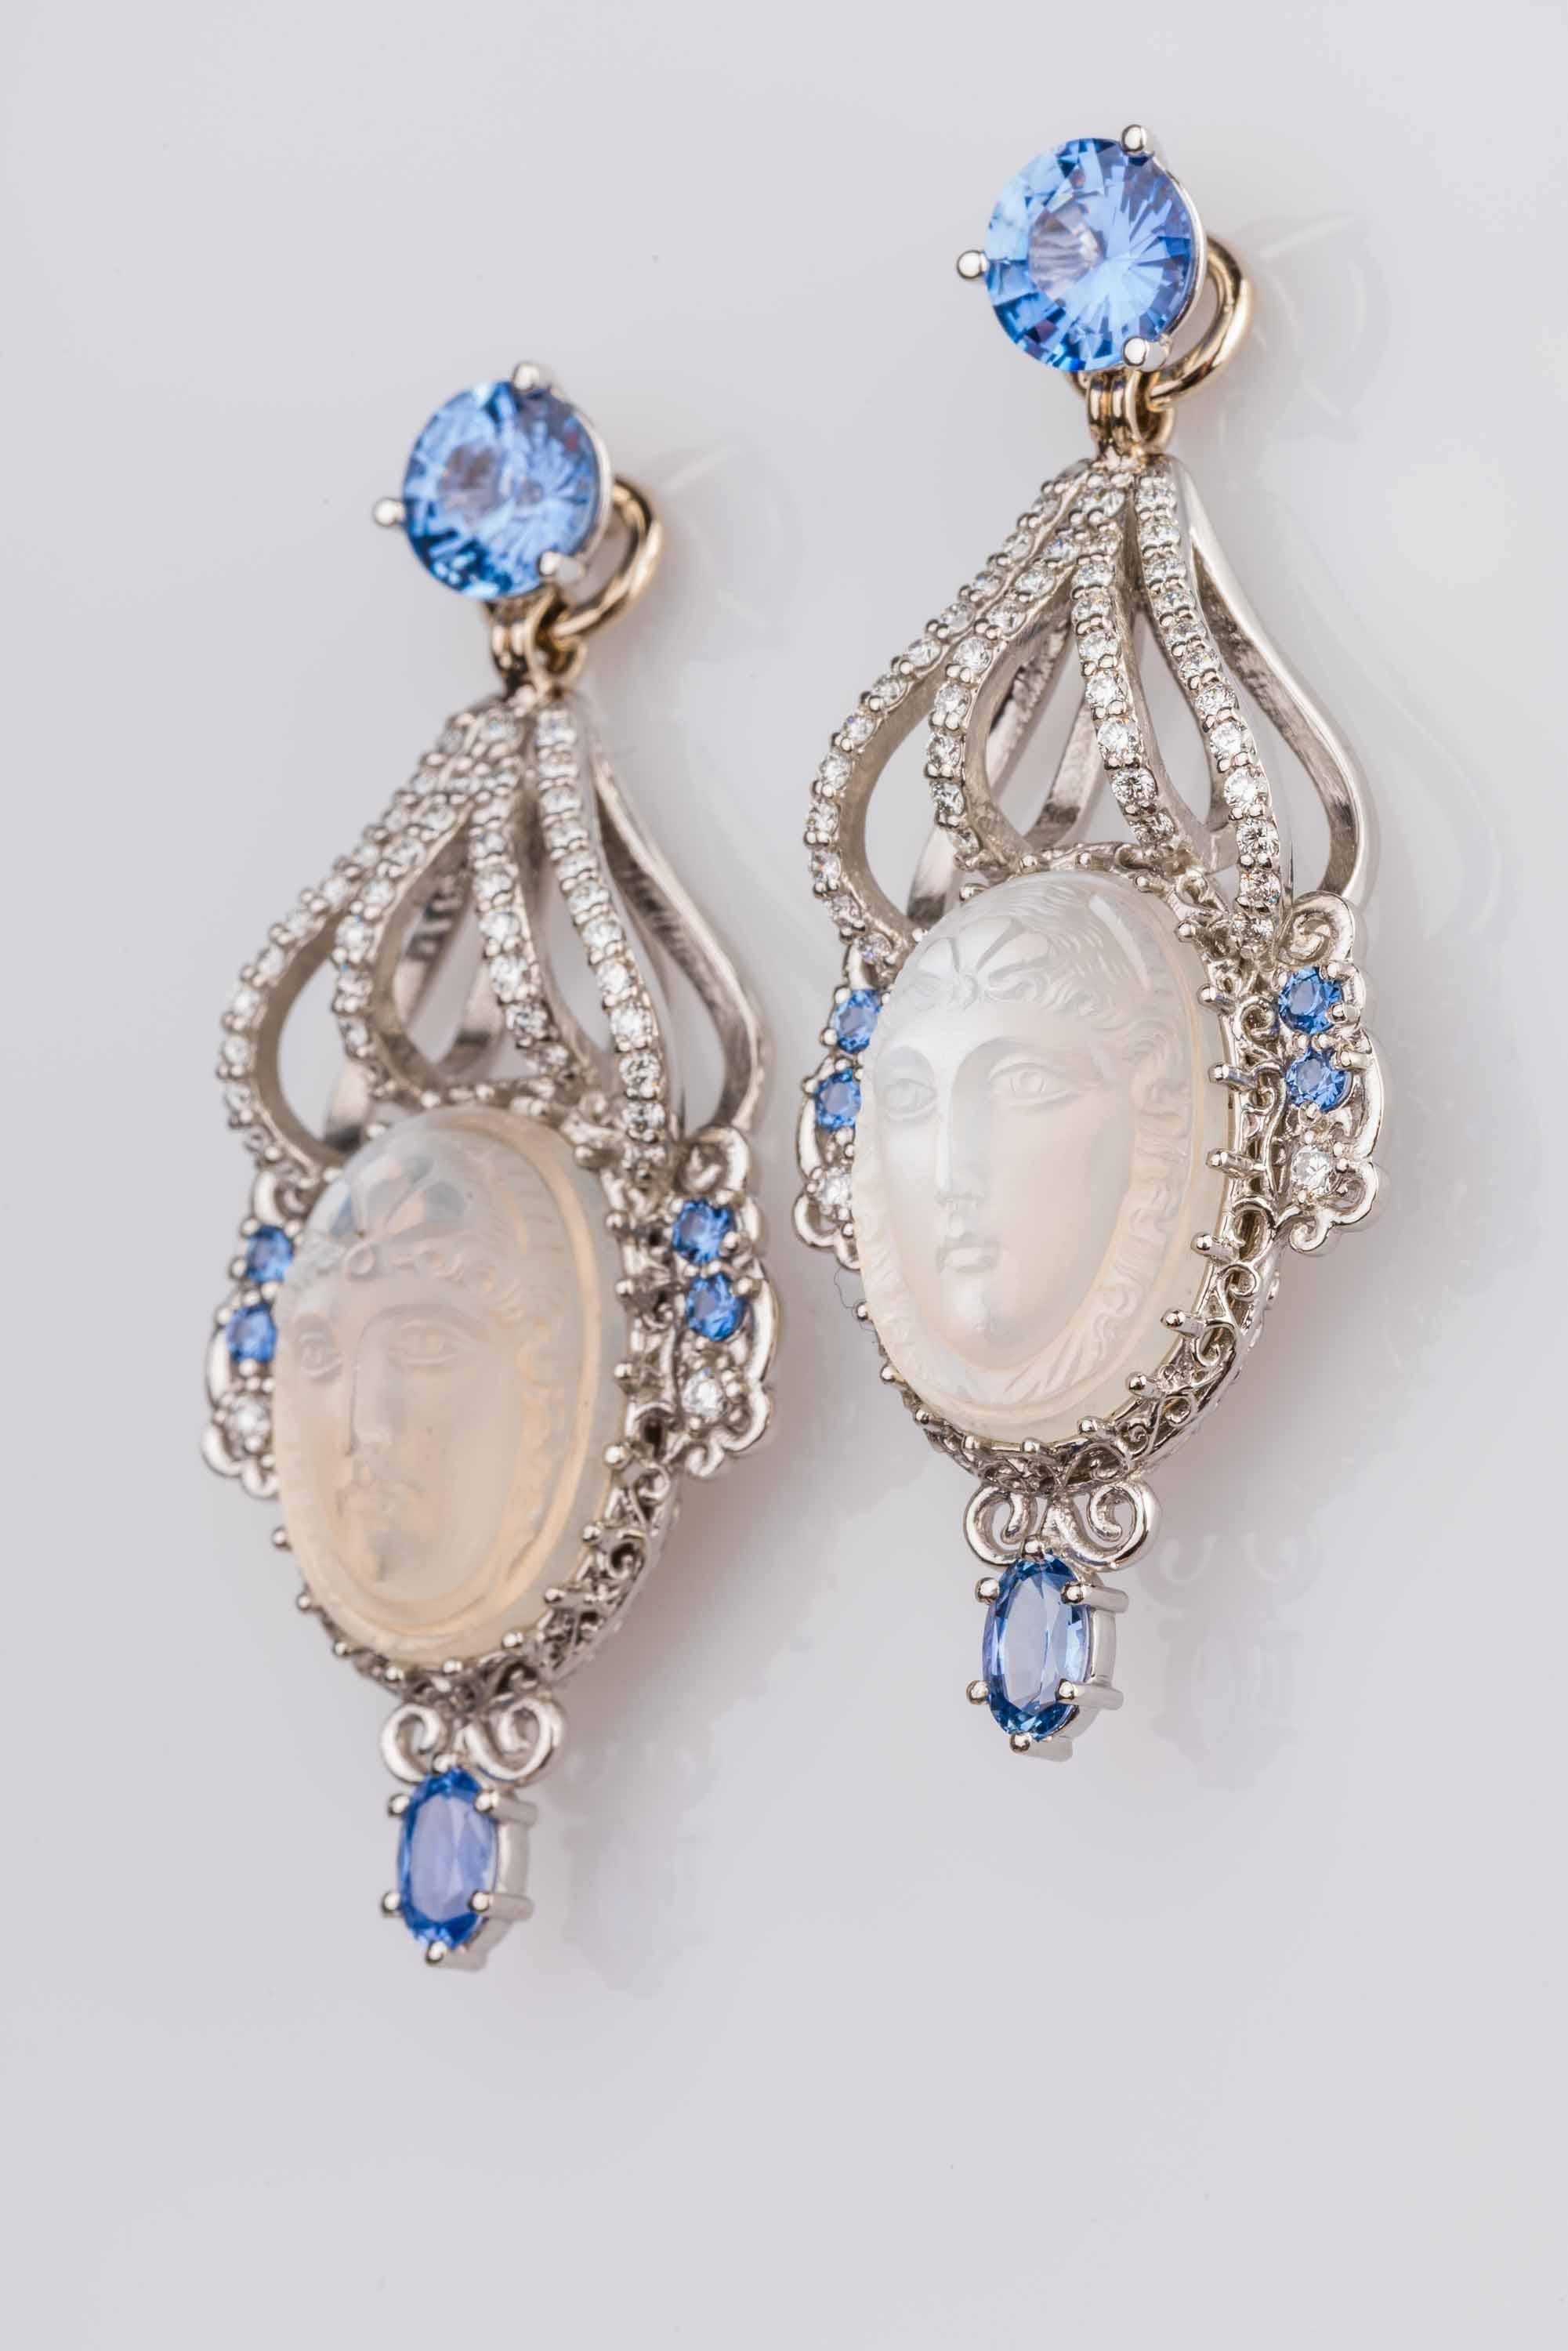 A pair of platinum and 18k white gold earring jackets featuring a pair of oval 16.1mm X 11.25mm vintage carved moonstones, 0.56 total carat weight round full cut white diamonds F color VS clarity 0.27 total carat weight round natural Yogo blue